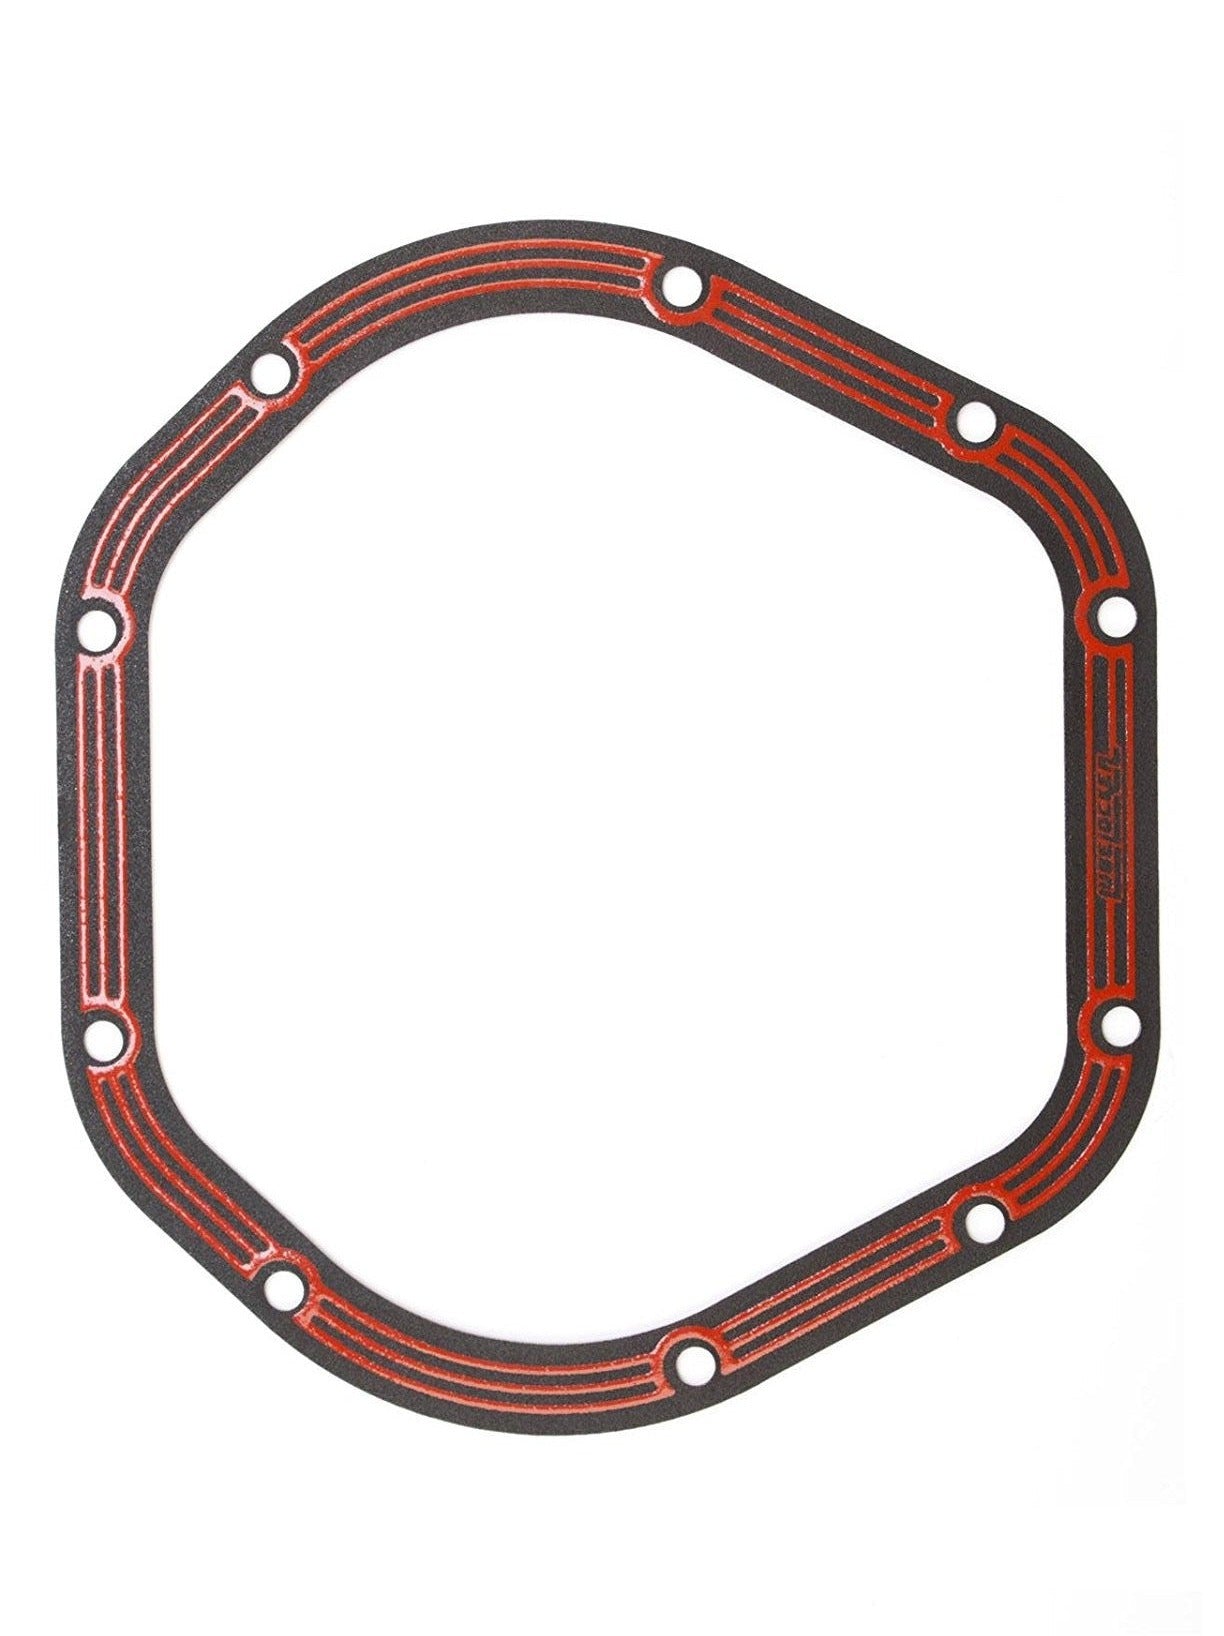 Scout Dana 44 Differential Gasket